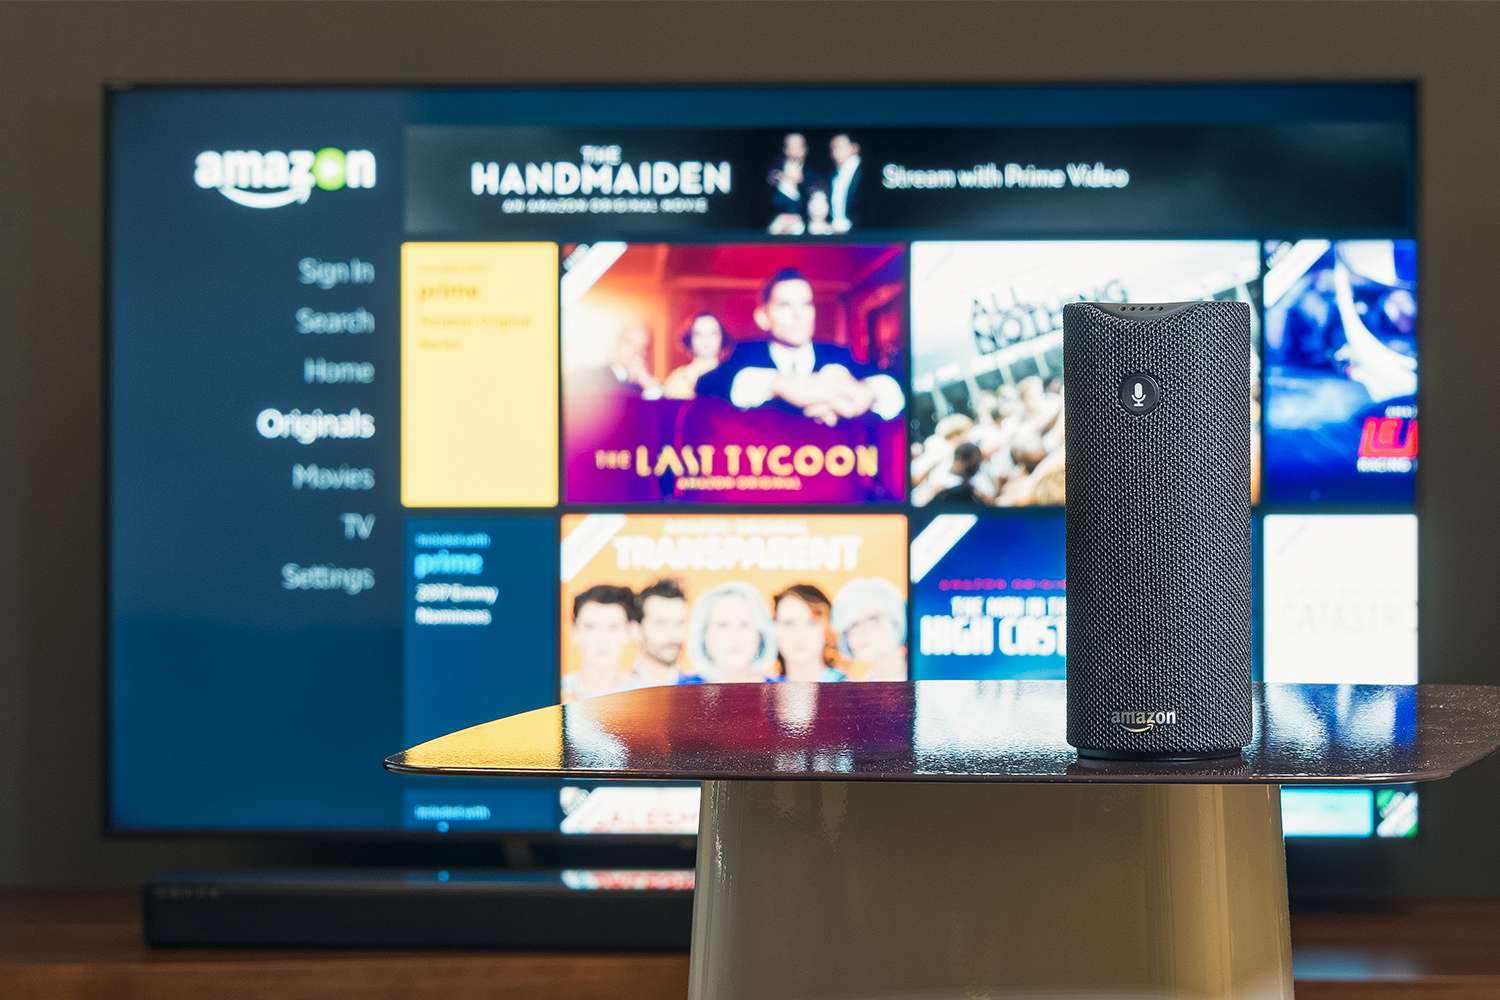 Fire TVs are getting expanded Alexa controls, new smart home features